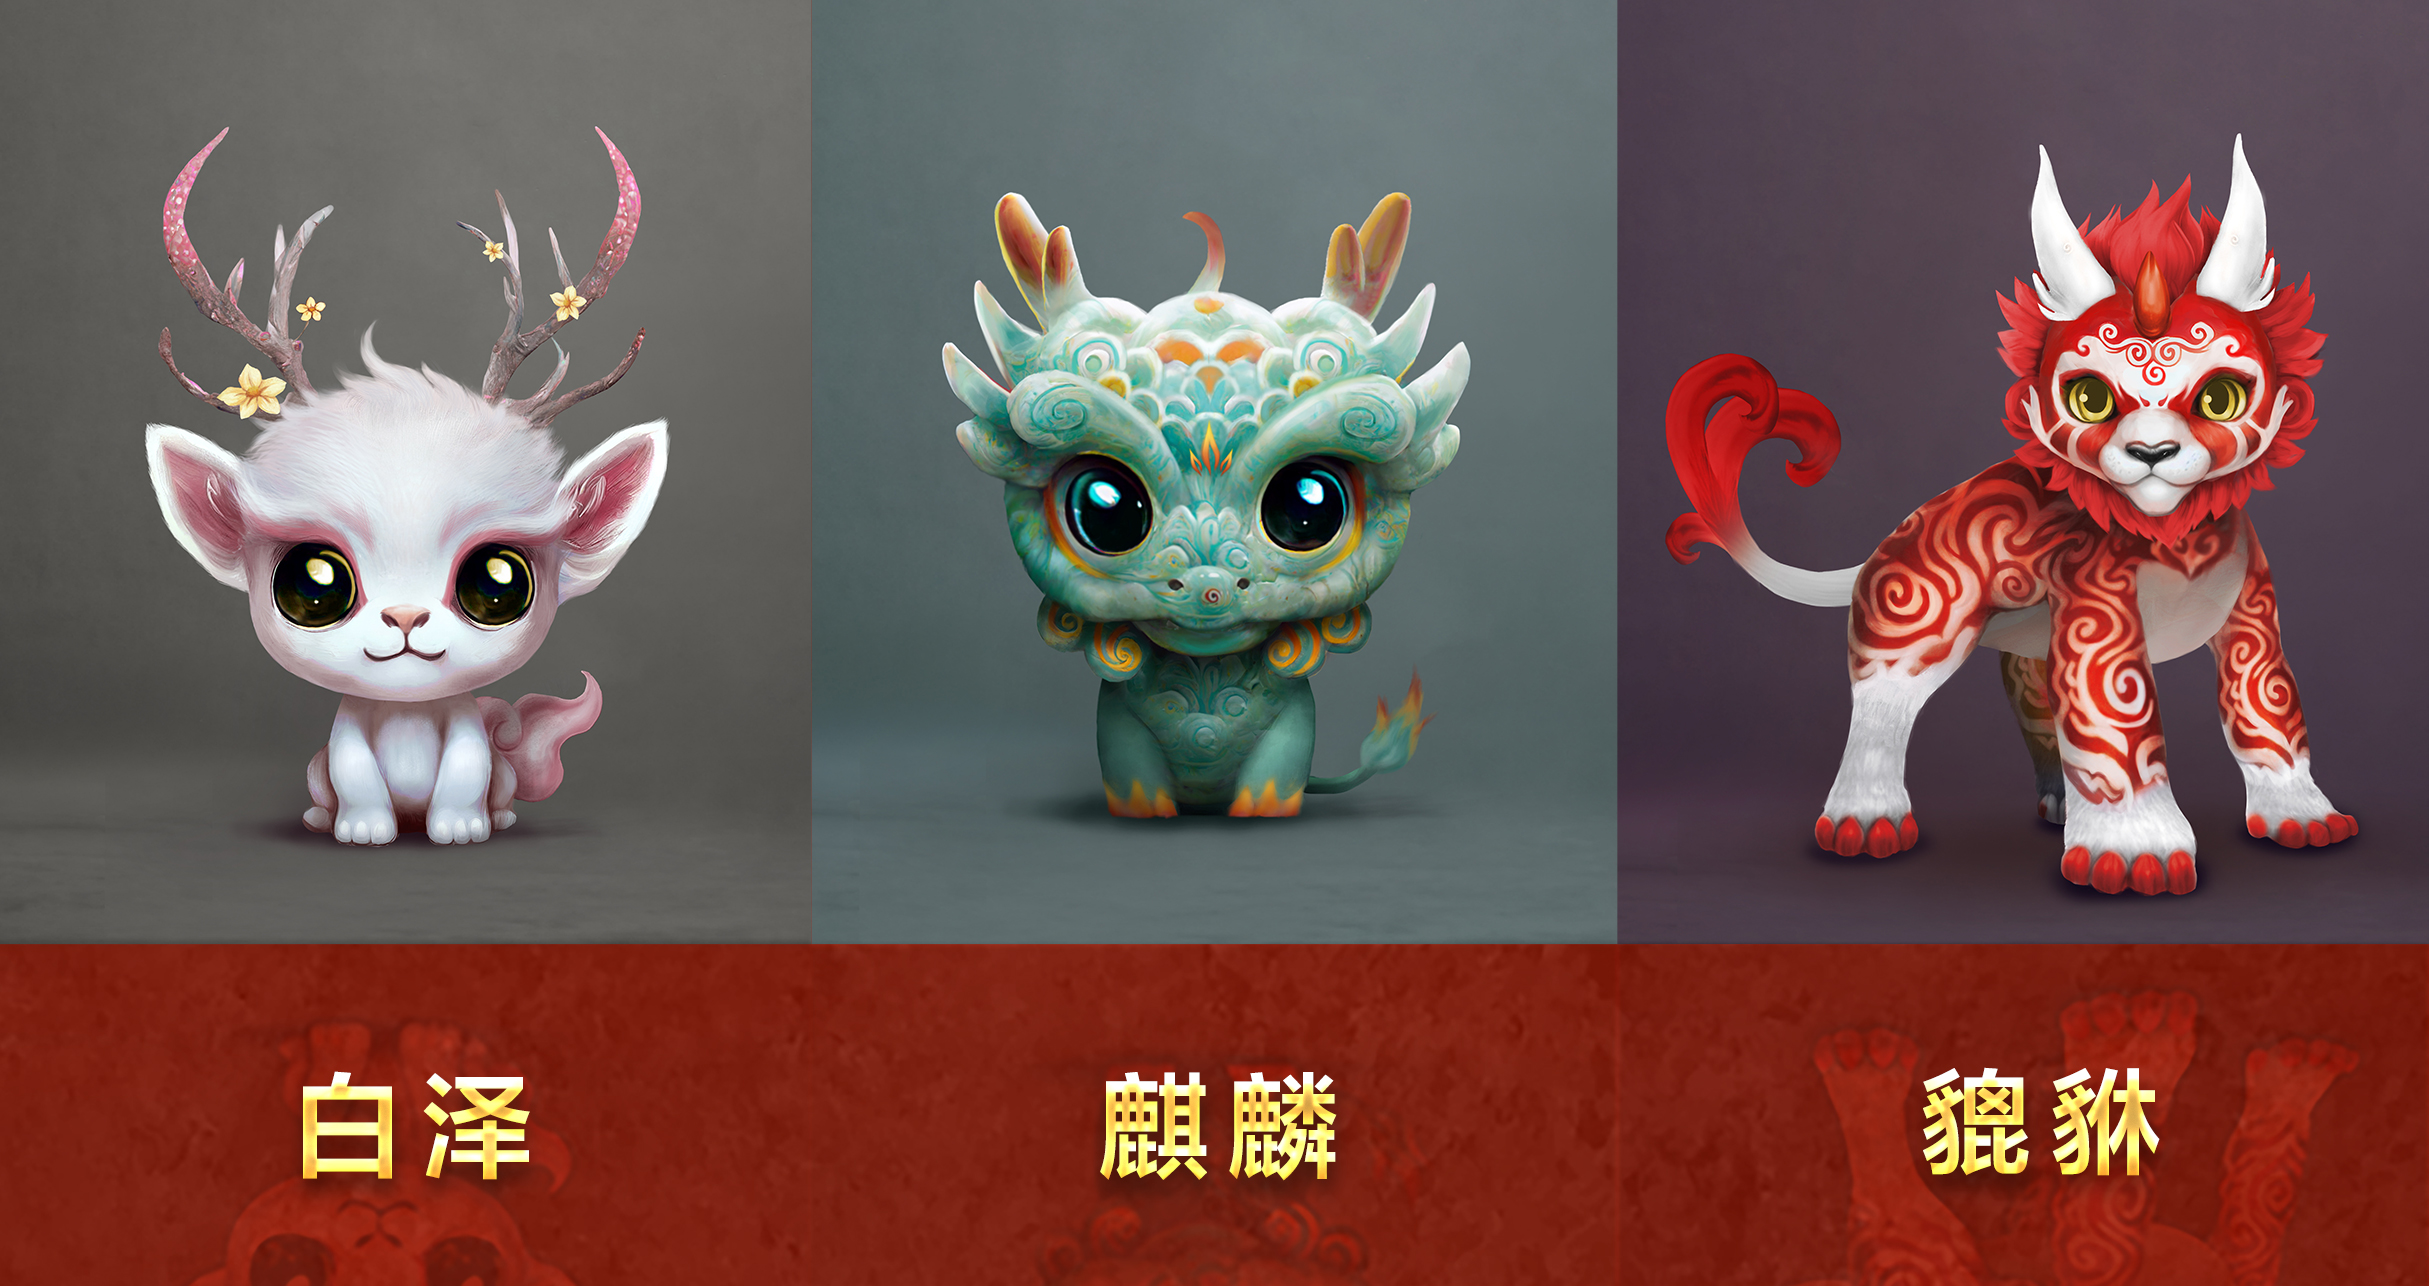 (L to R) Illustrations of legendary Chinese creatures, Baize, Qilin and Pixiu. /CMG